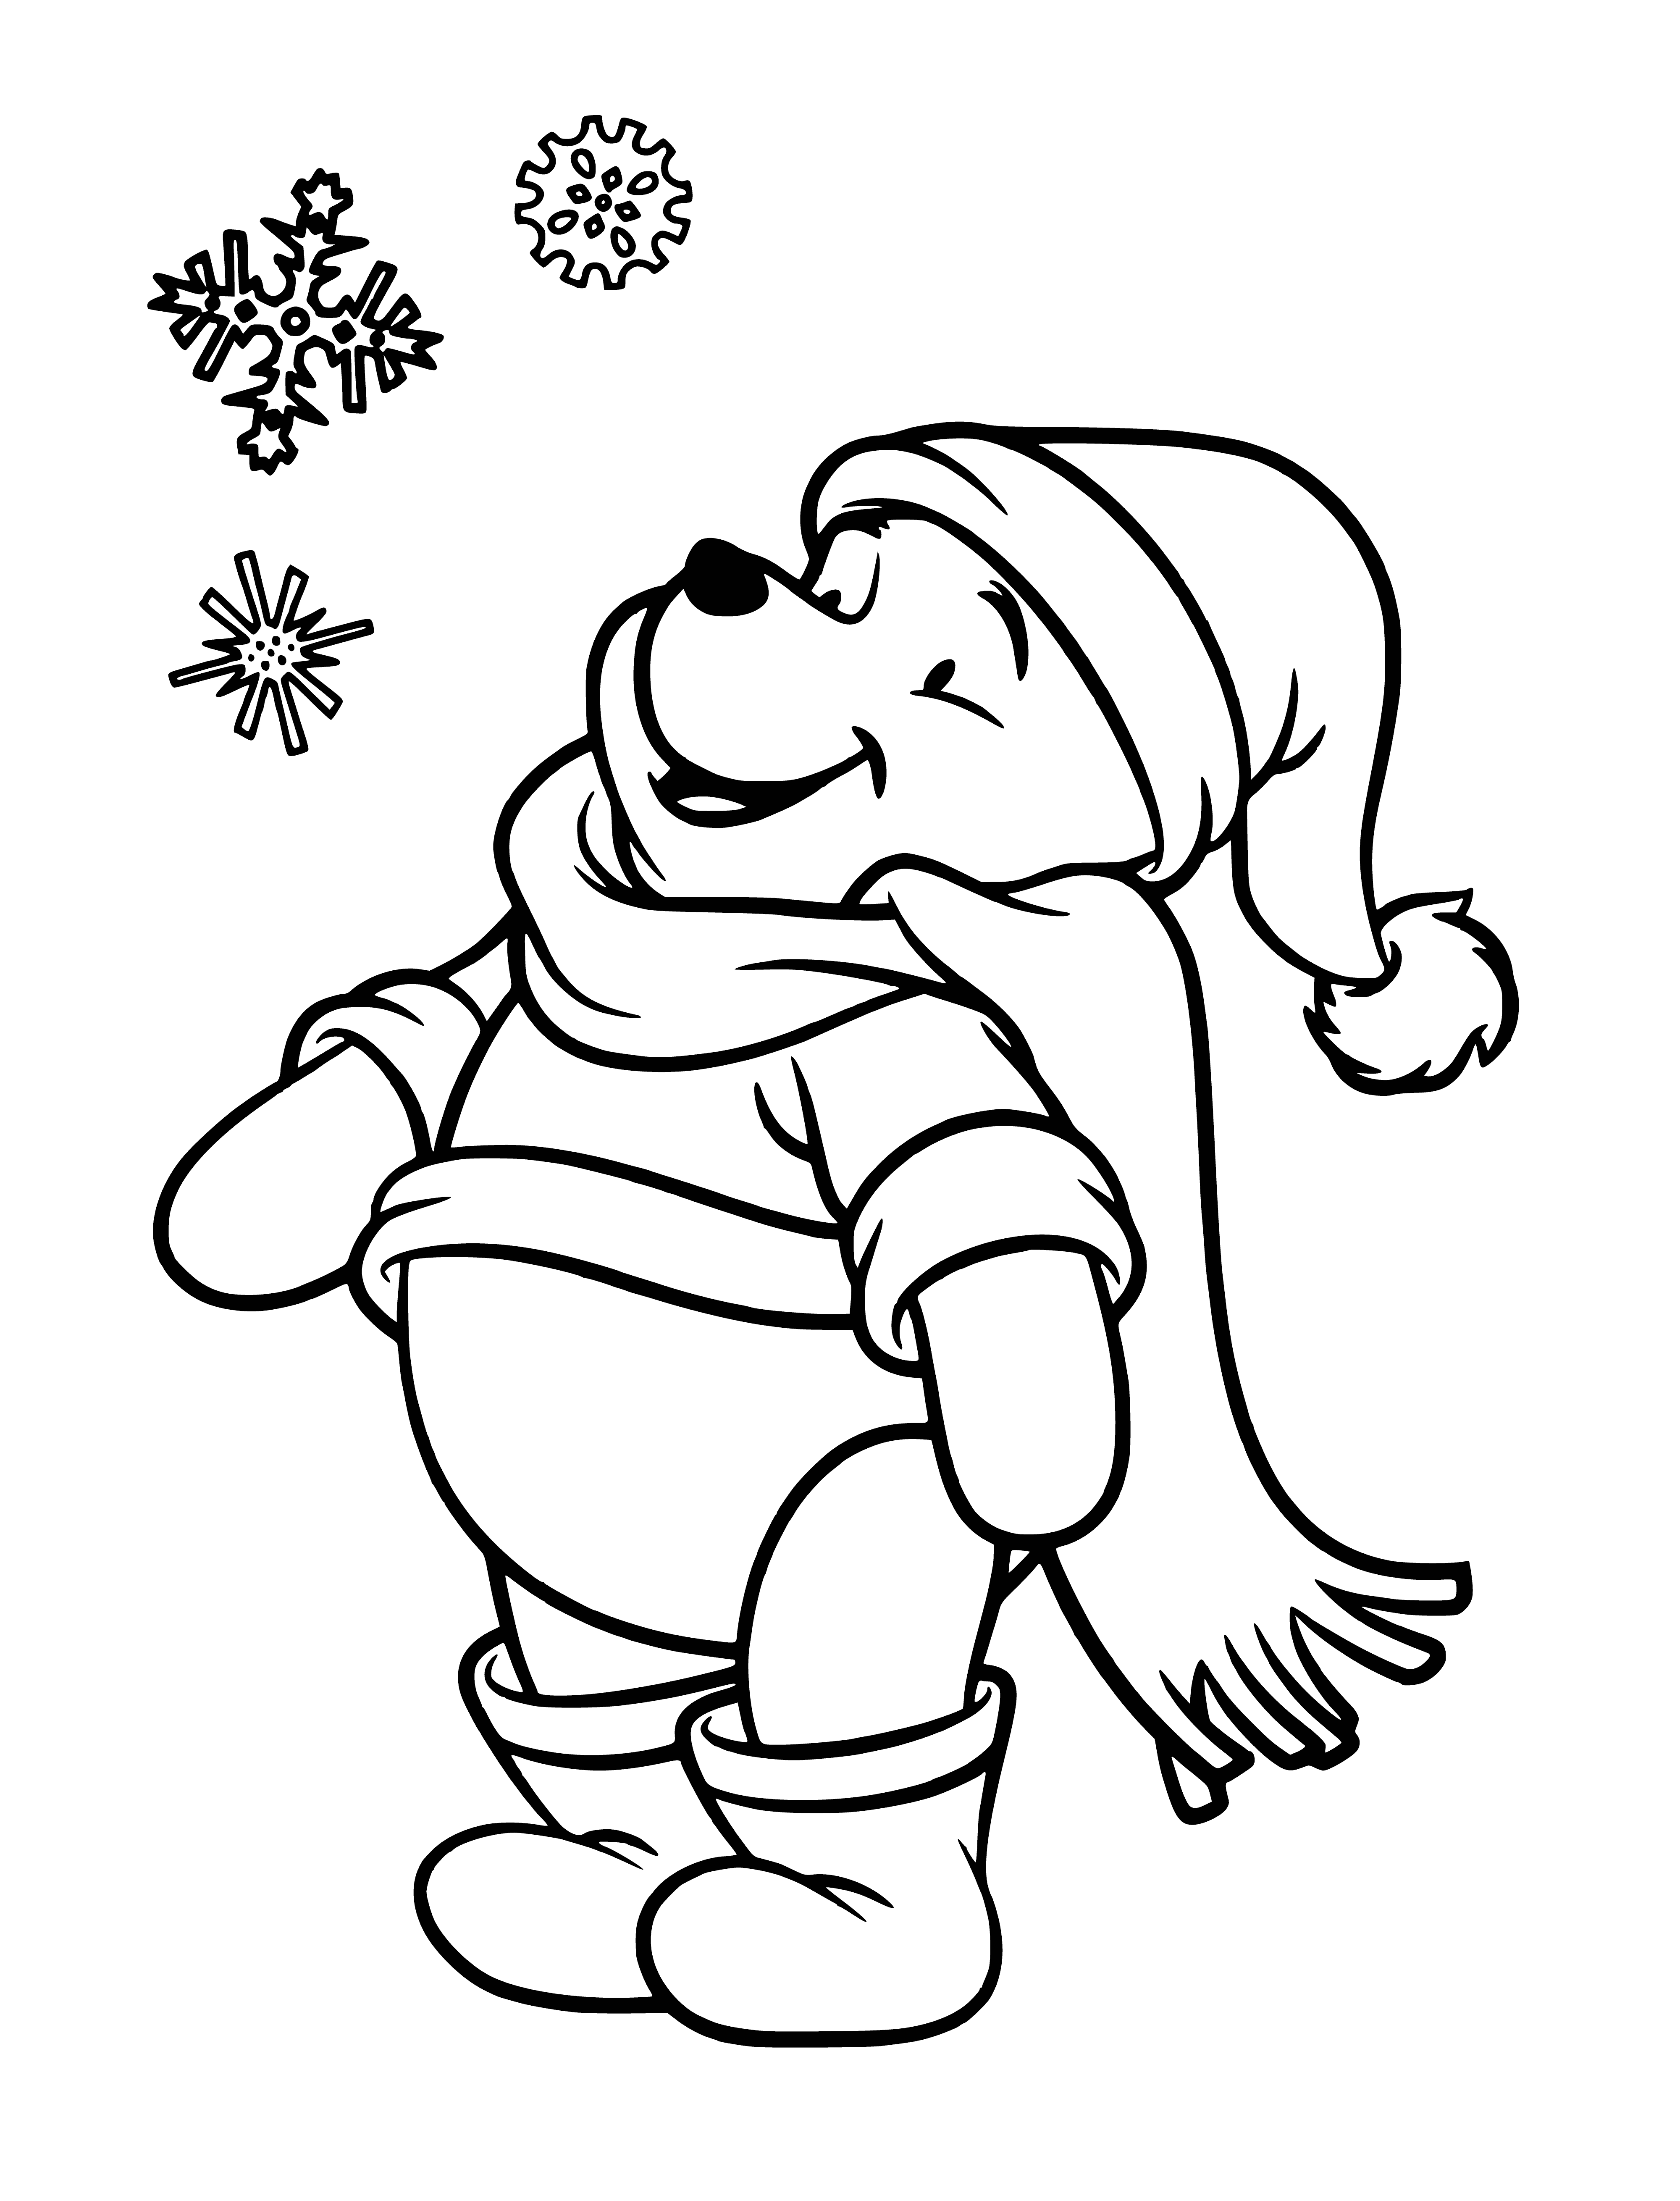 coloring page: Winnie and friends celebrating the New Year around a snowman, toasting with glasses and wishing each other "Happy New Year!"